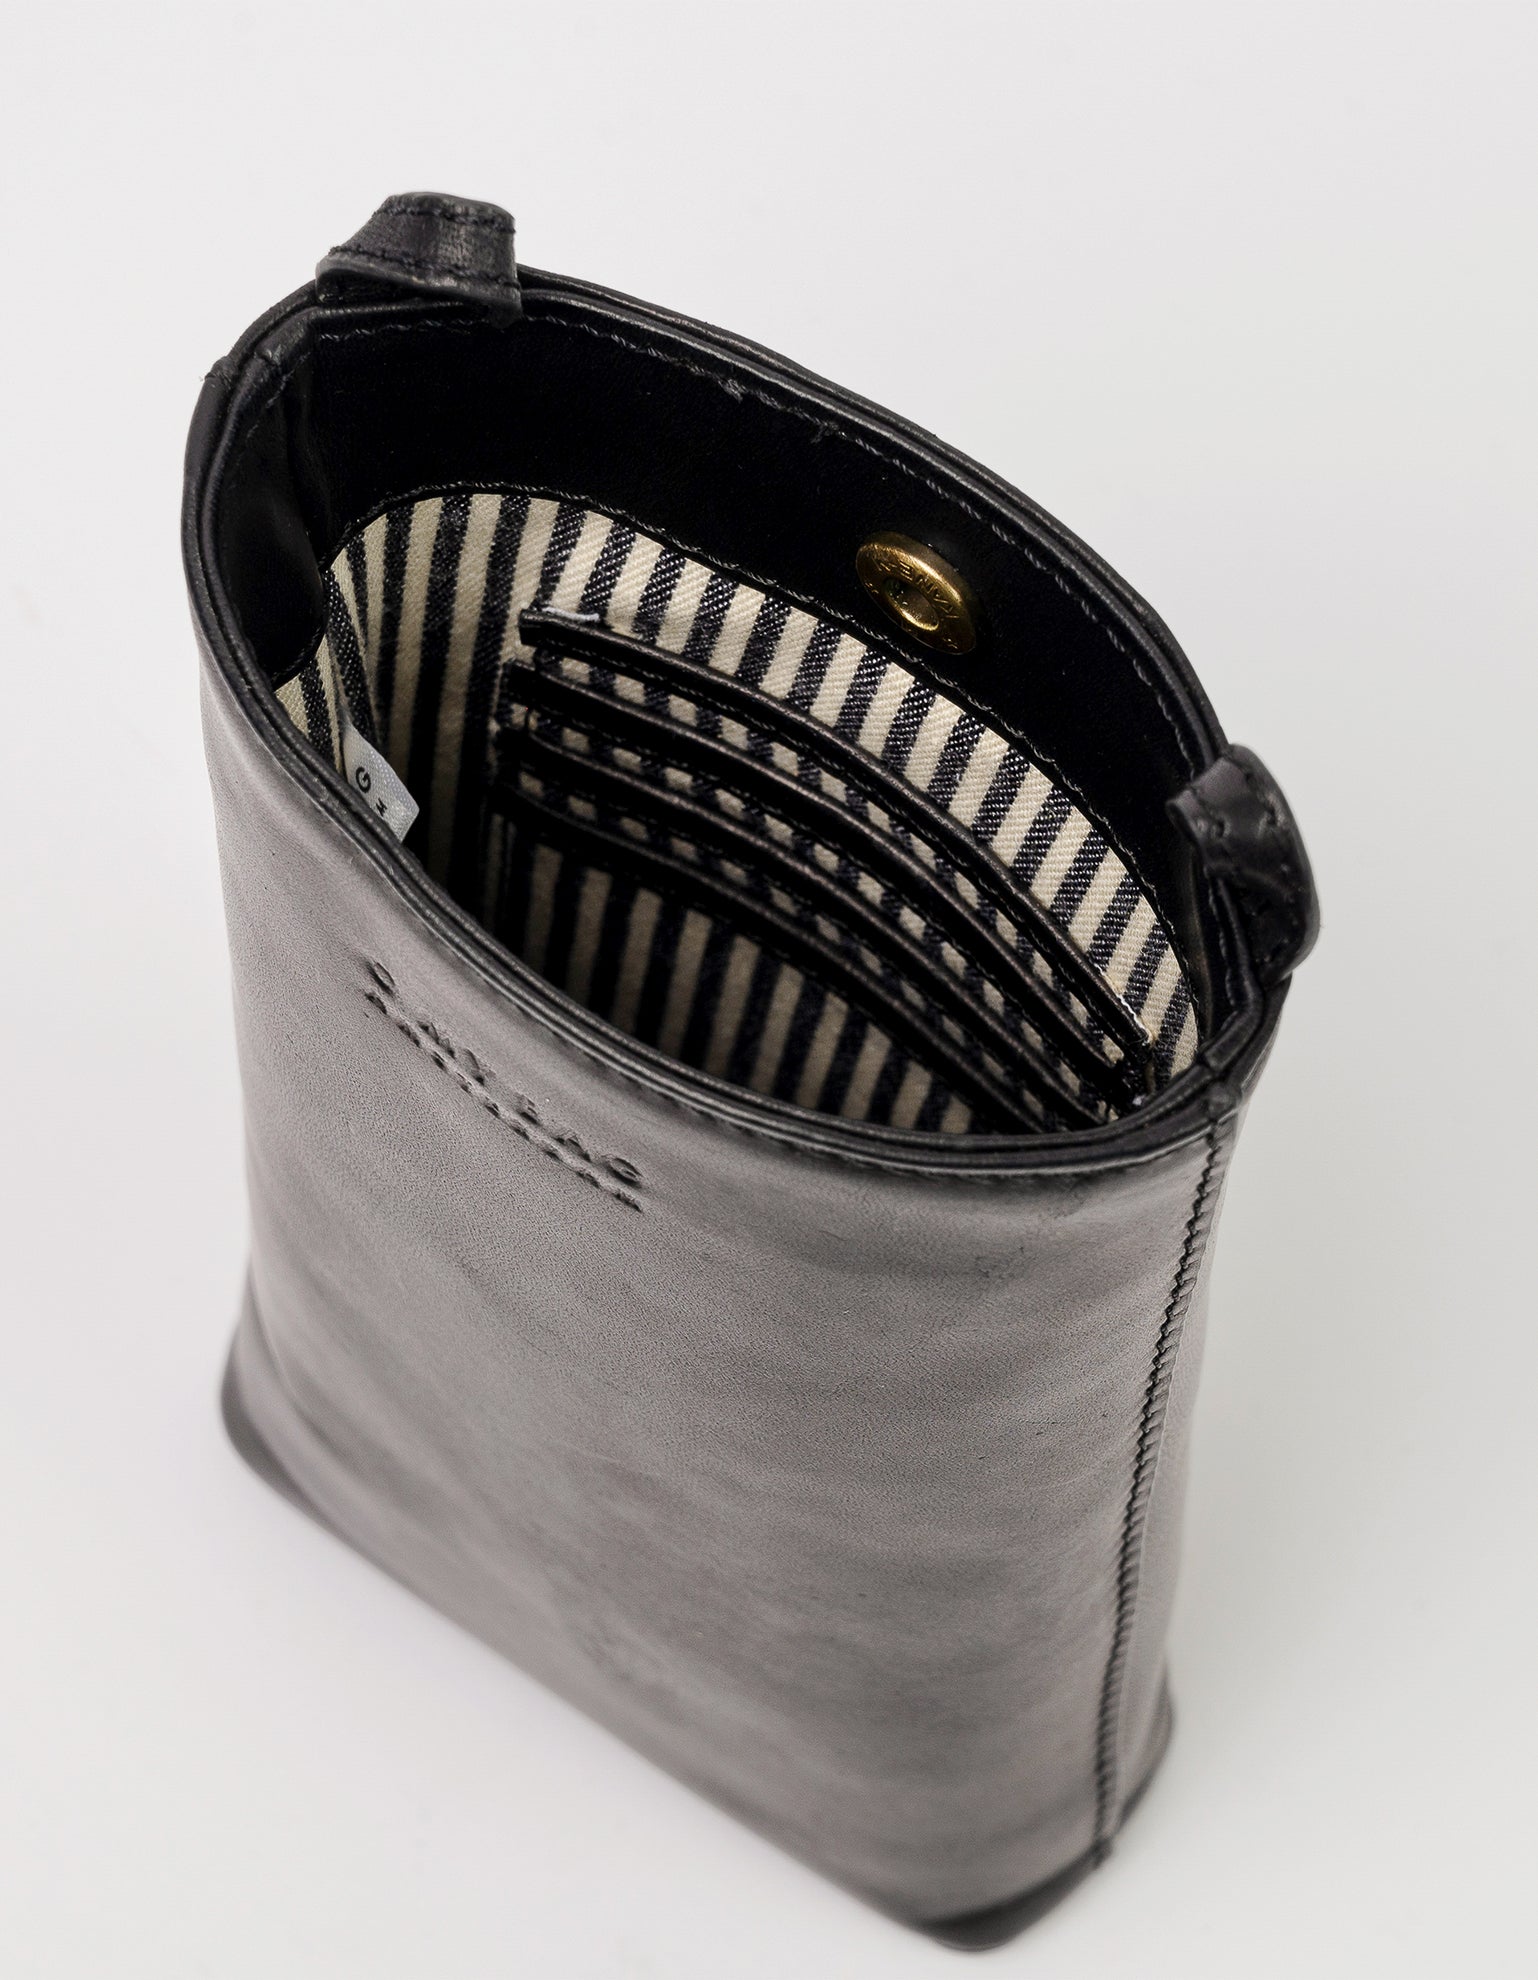 Charlie phone bag - black classic leather - inside product image